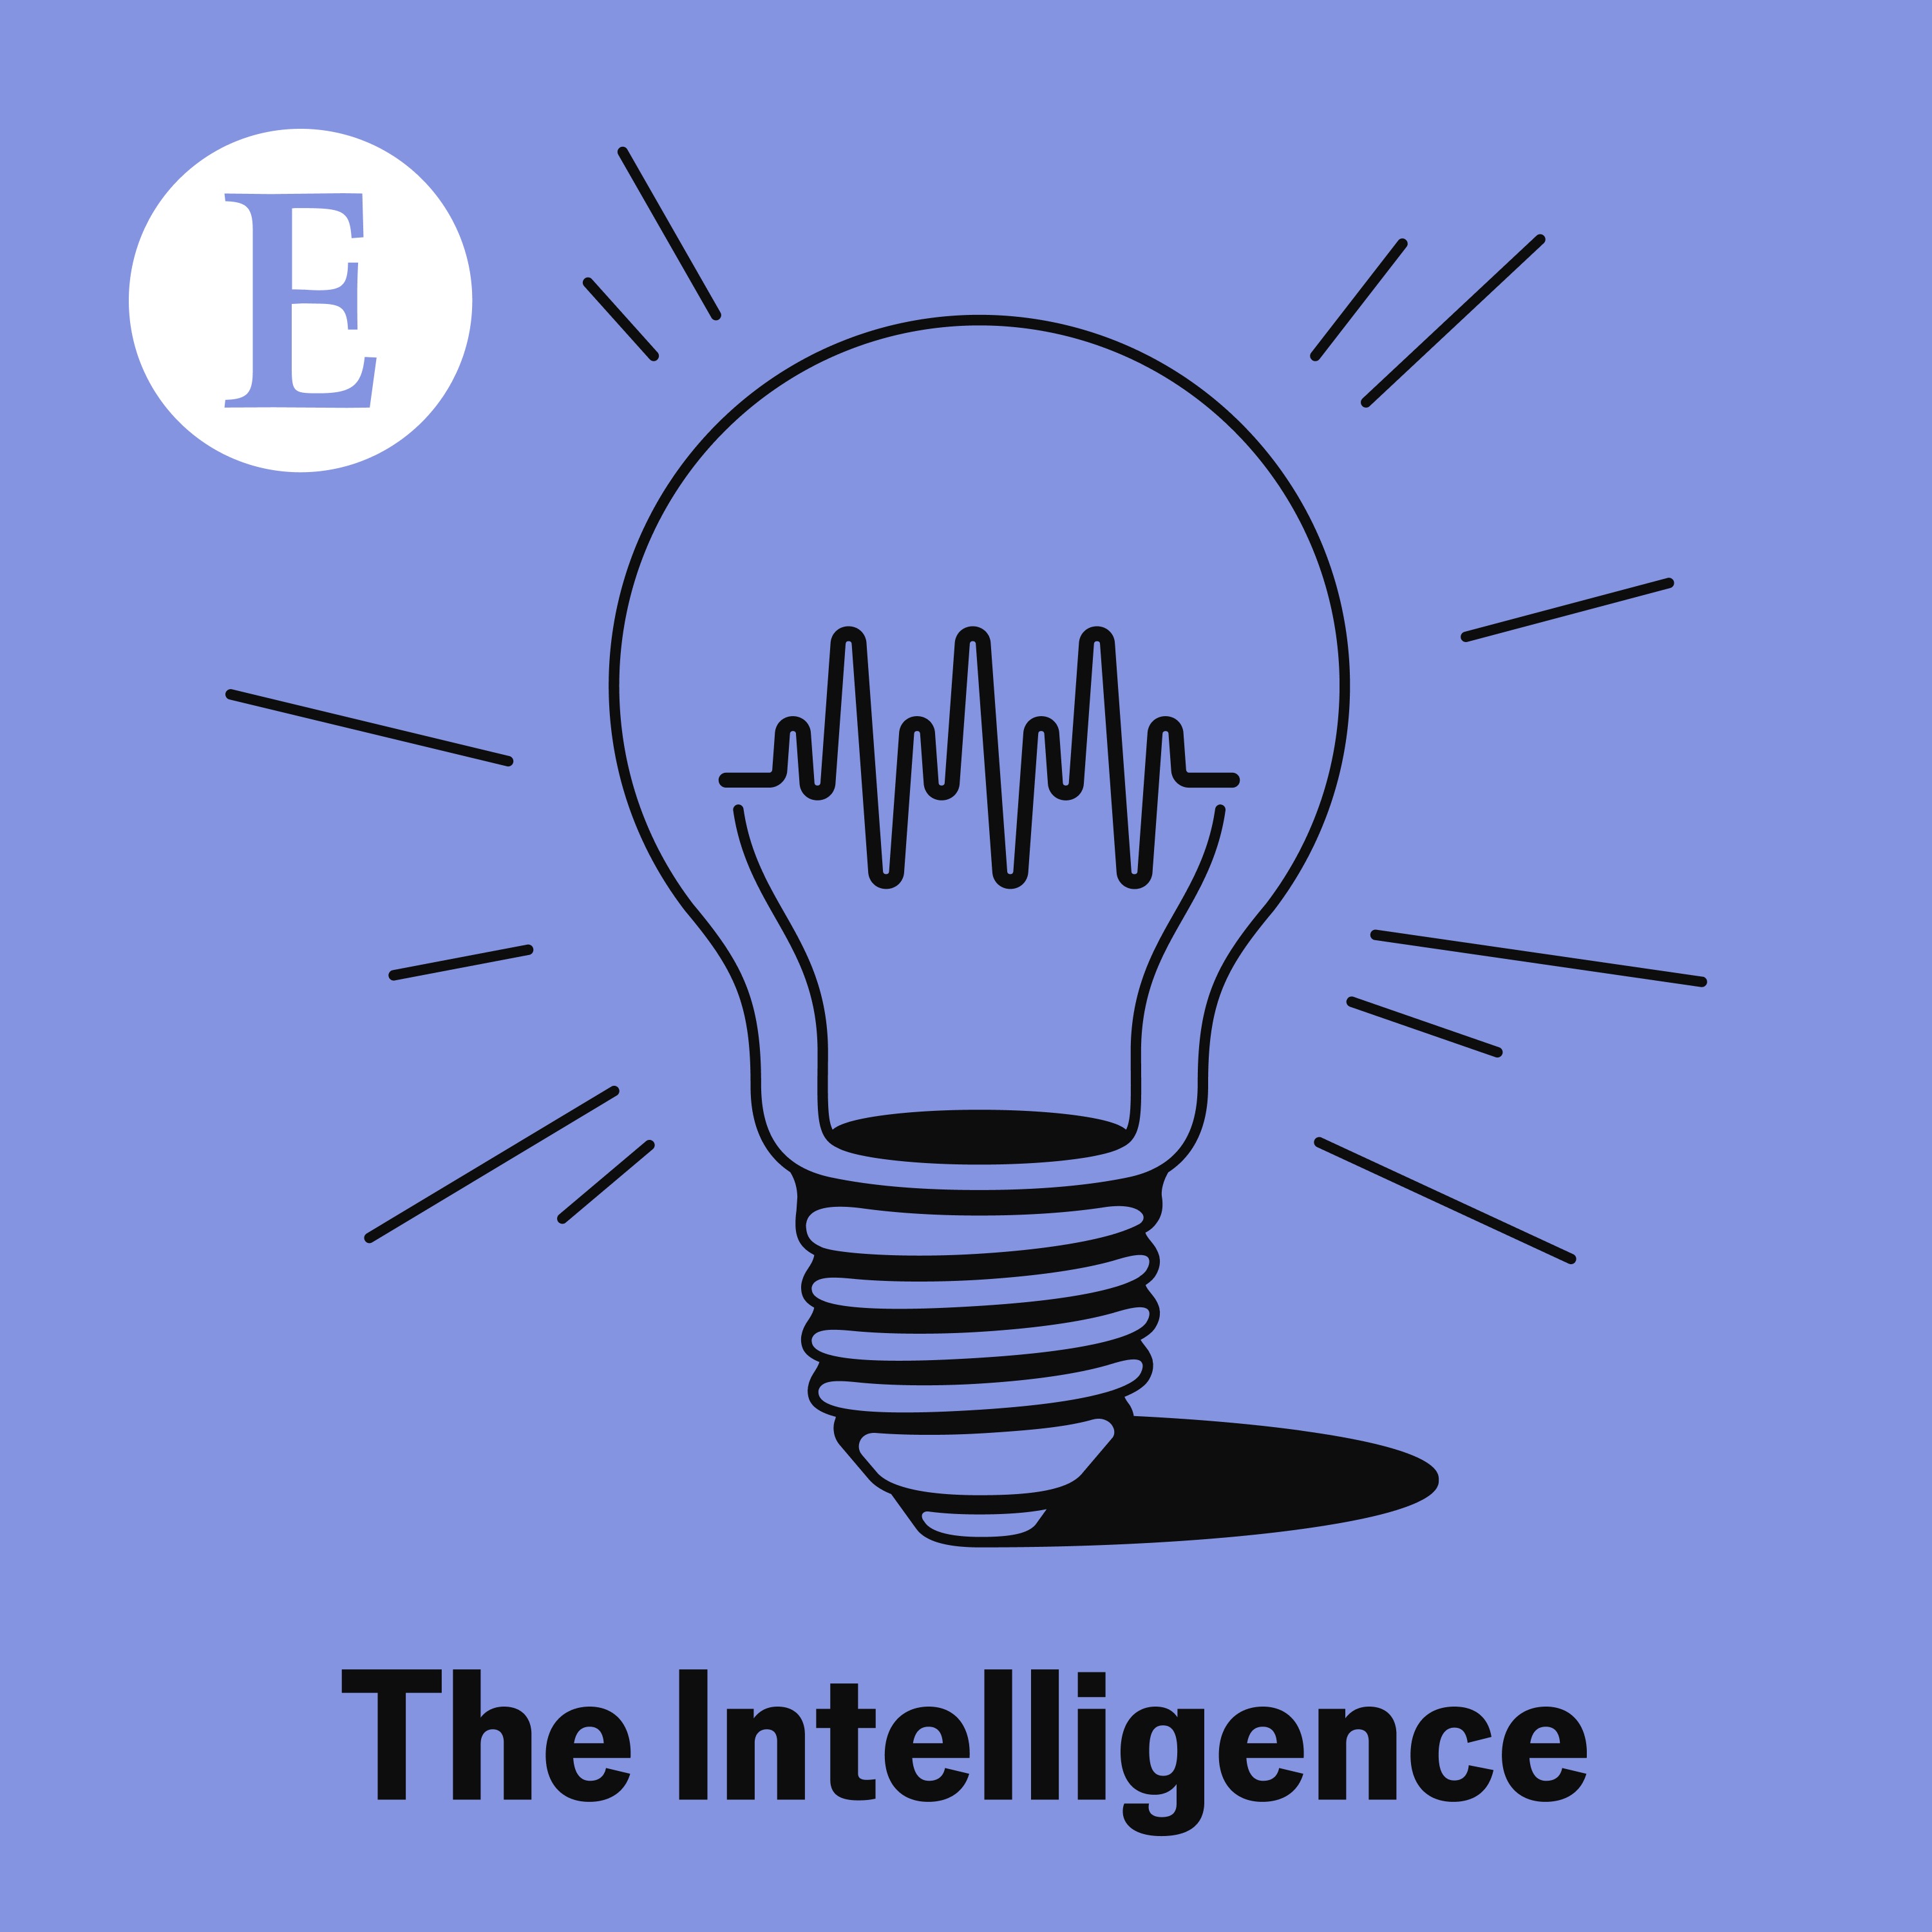 The Intelligence from The Economist podcast